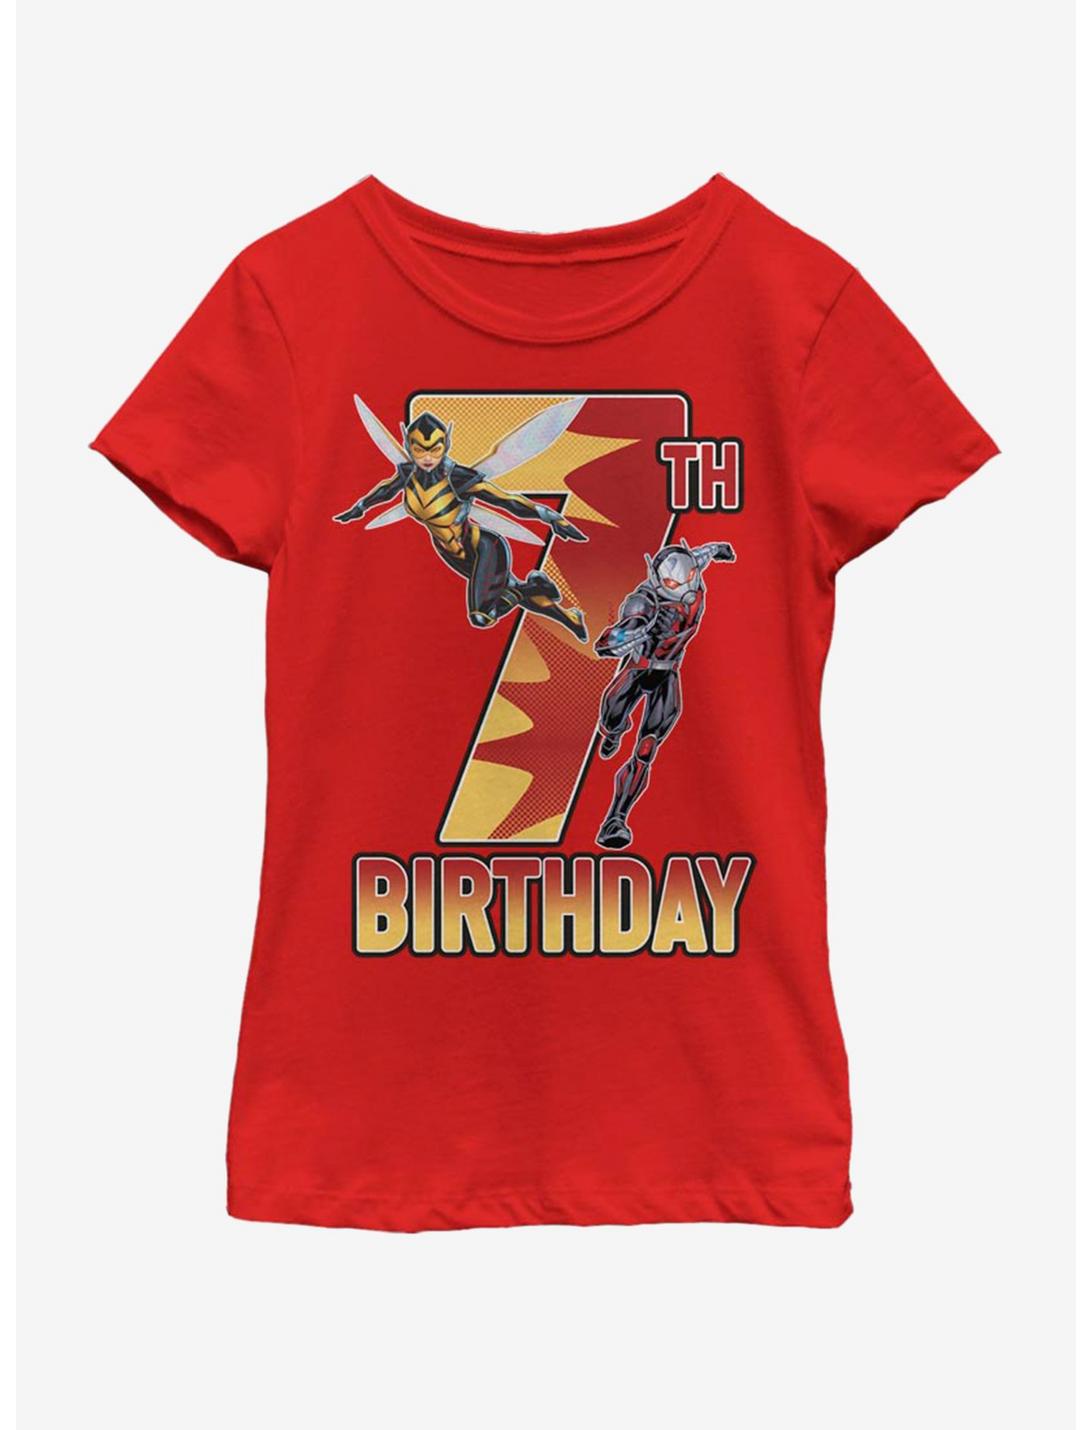 Marvel Antman Wasp Ant 7th Bday Youth Girls T-Shirt, RED, hi-res